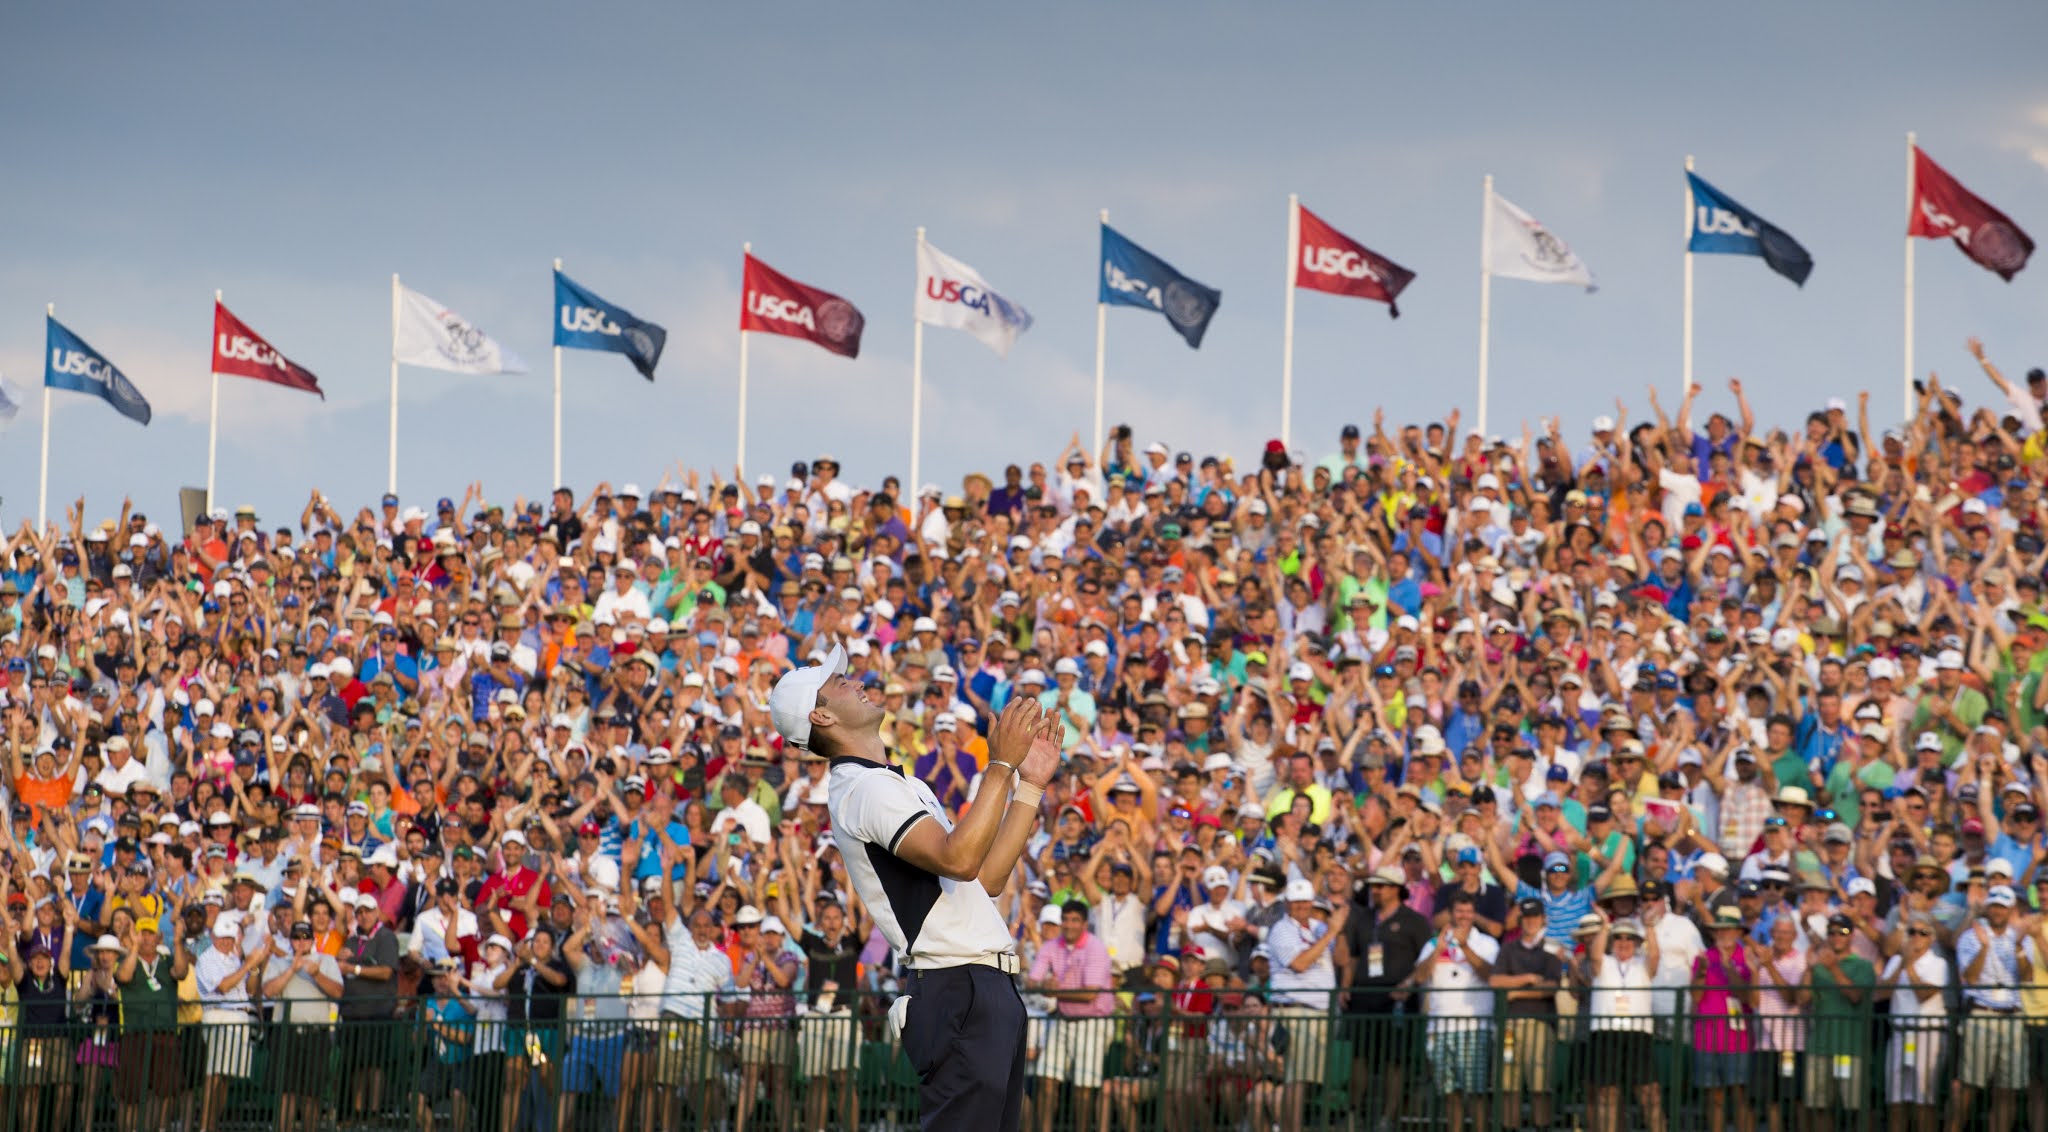 The 1 Writer in Golf USGA Announces Five U.S. Open Championships at